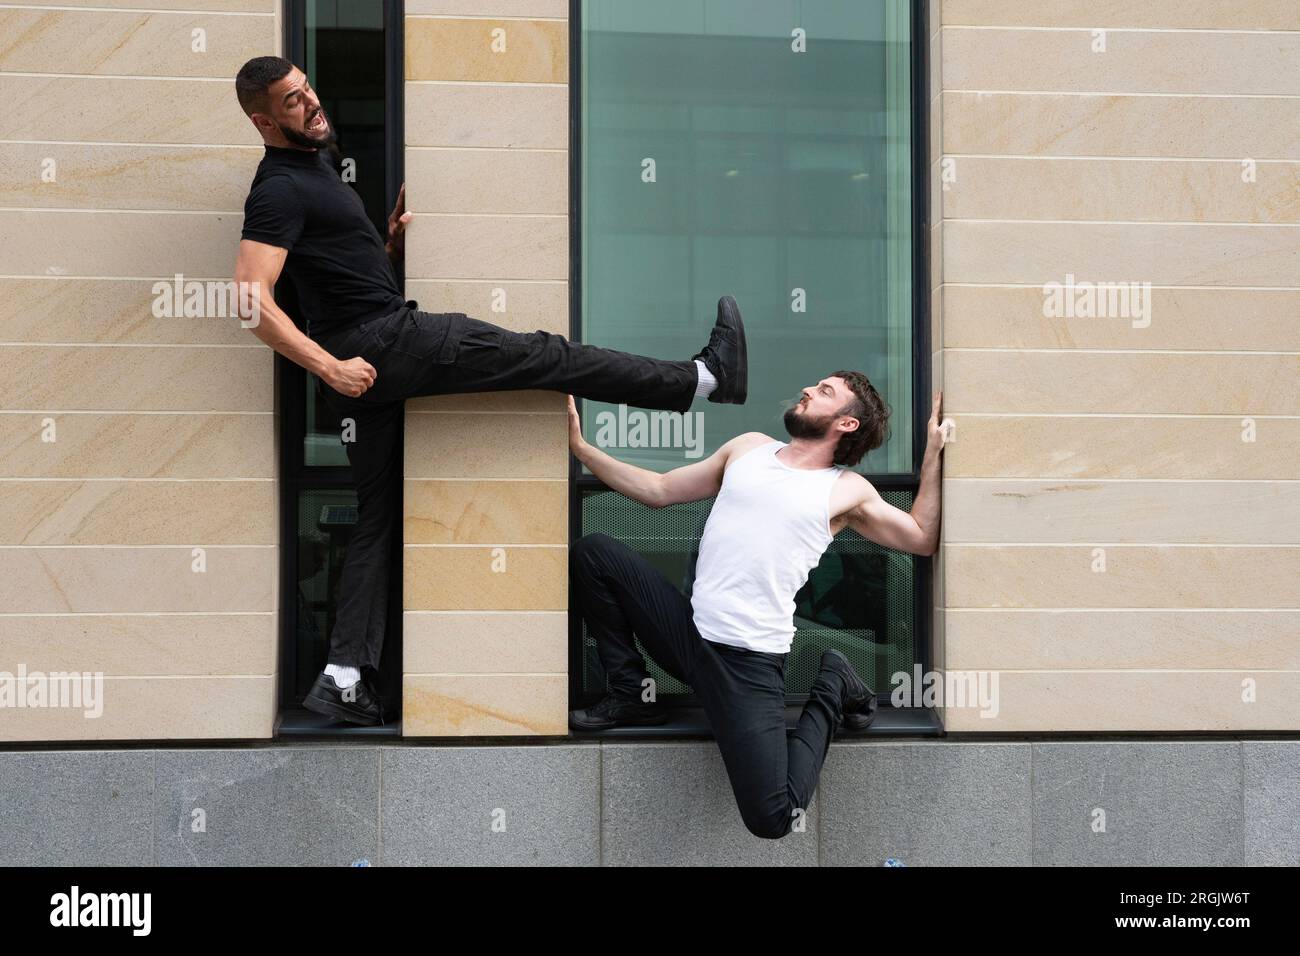 Edinburgh, Scotland, UK. 10th August 2023.  Performers David Banks and Sadiq Ali act out stuntman scenes from the movies. Their show Stuntman looks at the impact of action-hero role models on men and boys by taking inspiration from movies such as Die Hard and John Wick. The show is running at Summerhall.  Iain Masterton/Alamy Live News Stock Photo